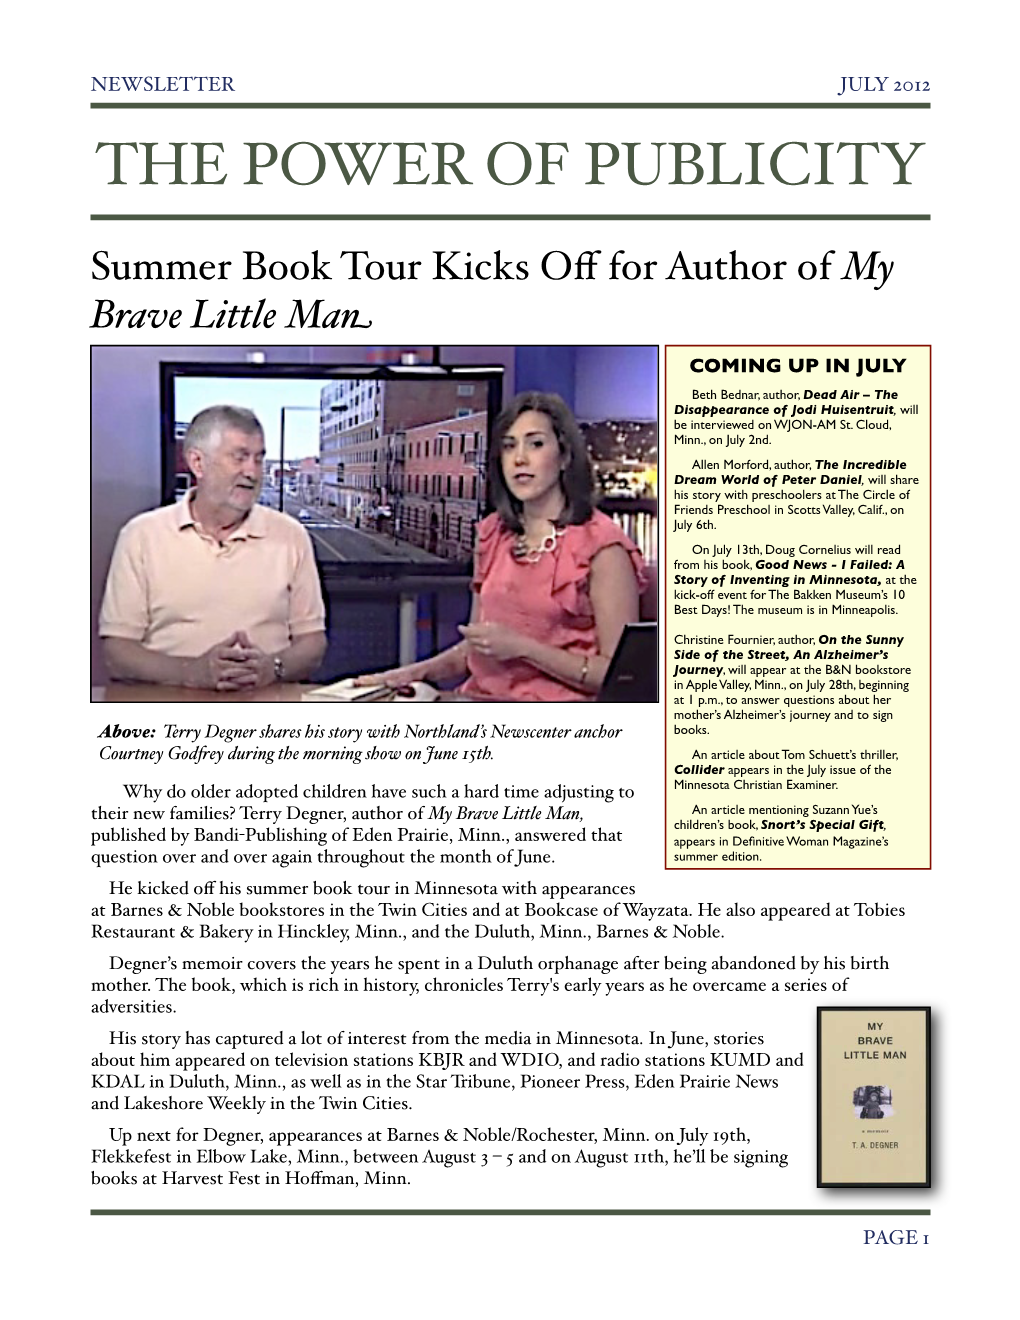 July 2012 the Power of Publicity